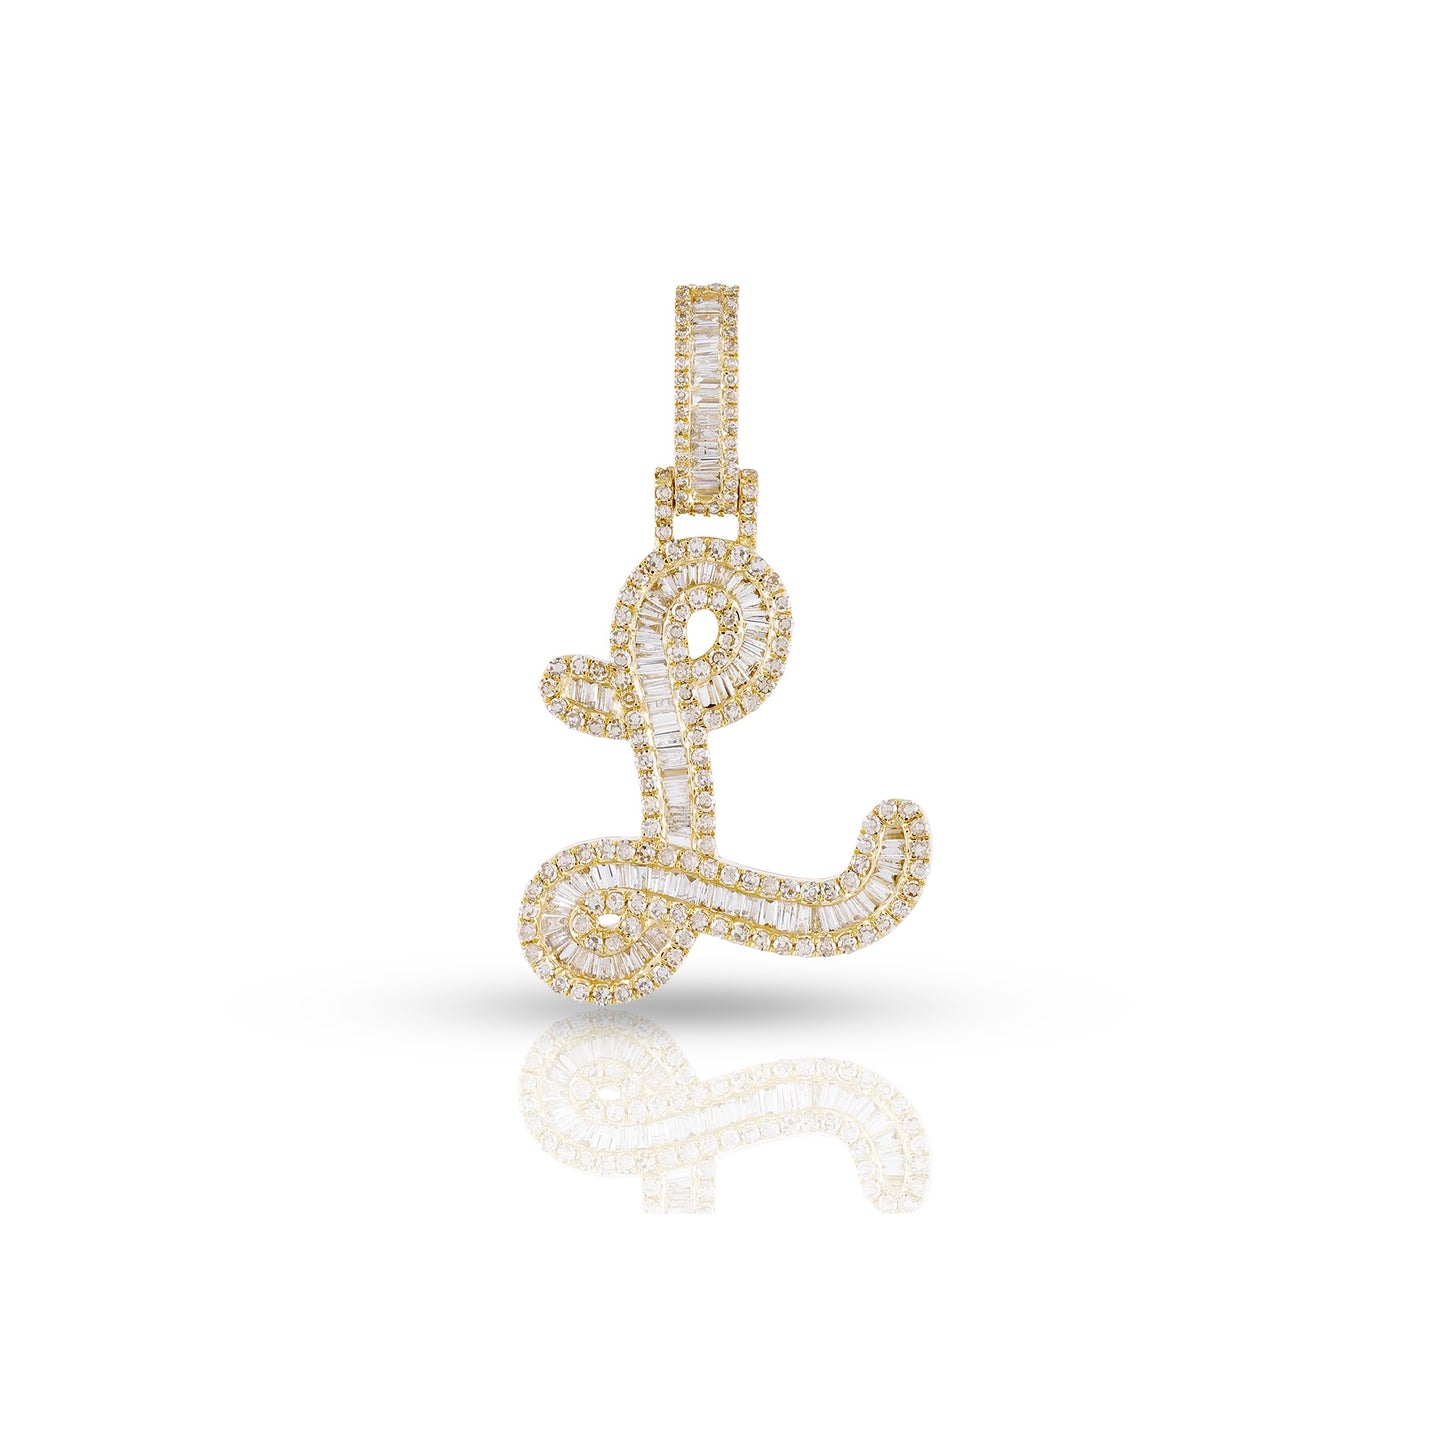 Yellow Gold Baguette Diamond Initial Letters Pendant by Truth Jewel